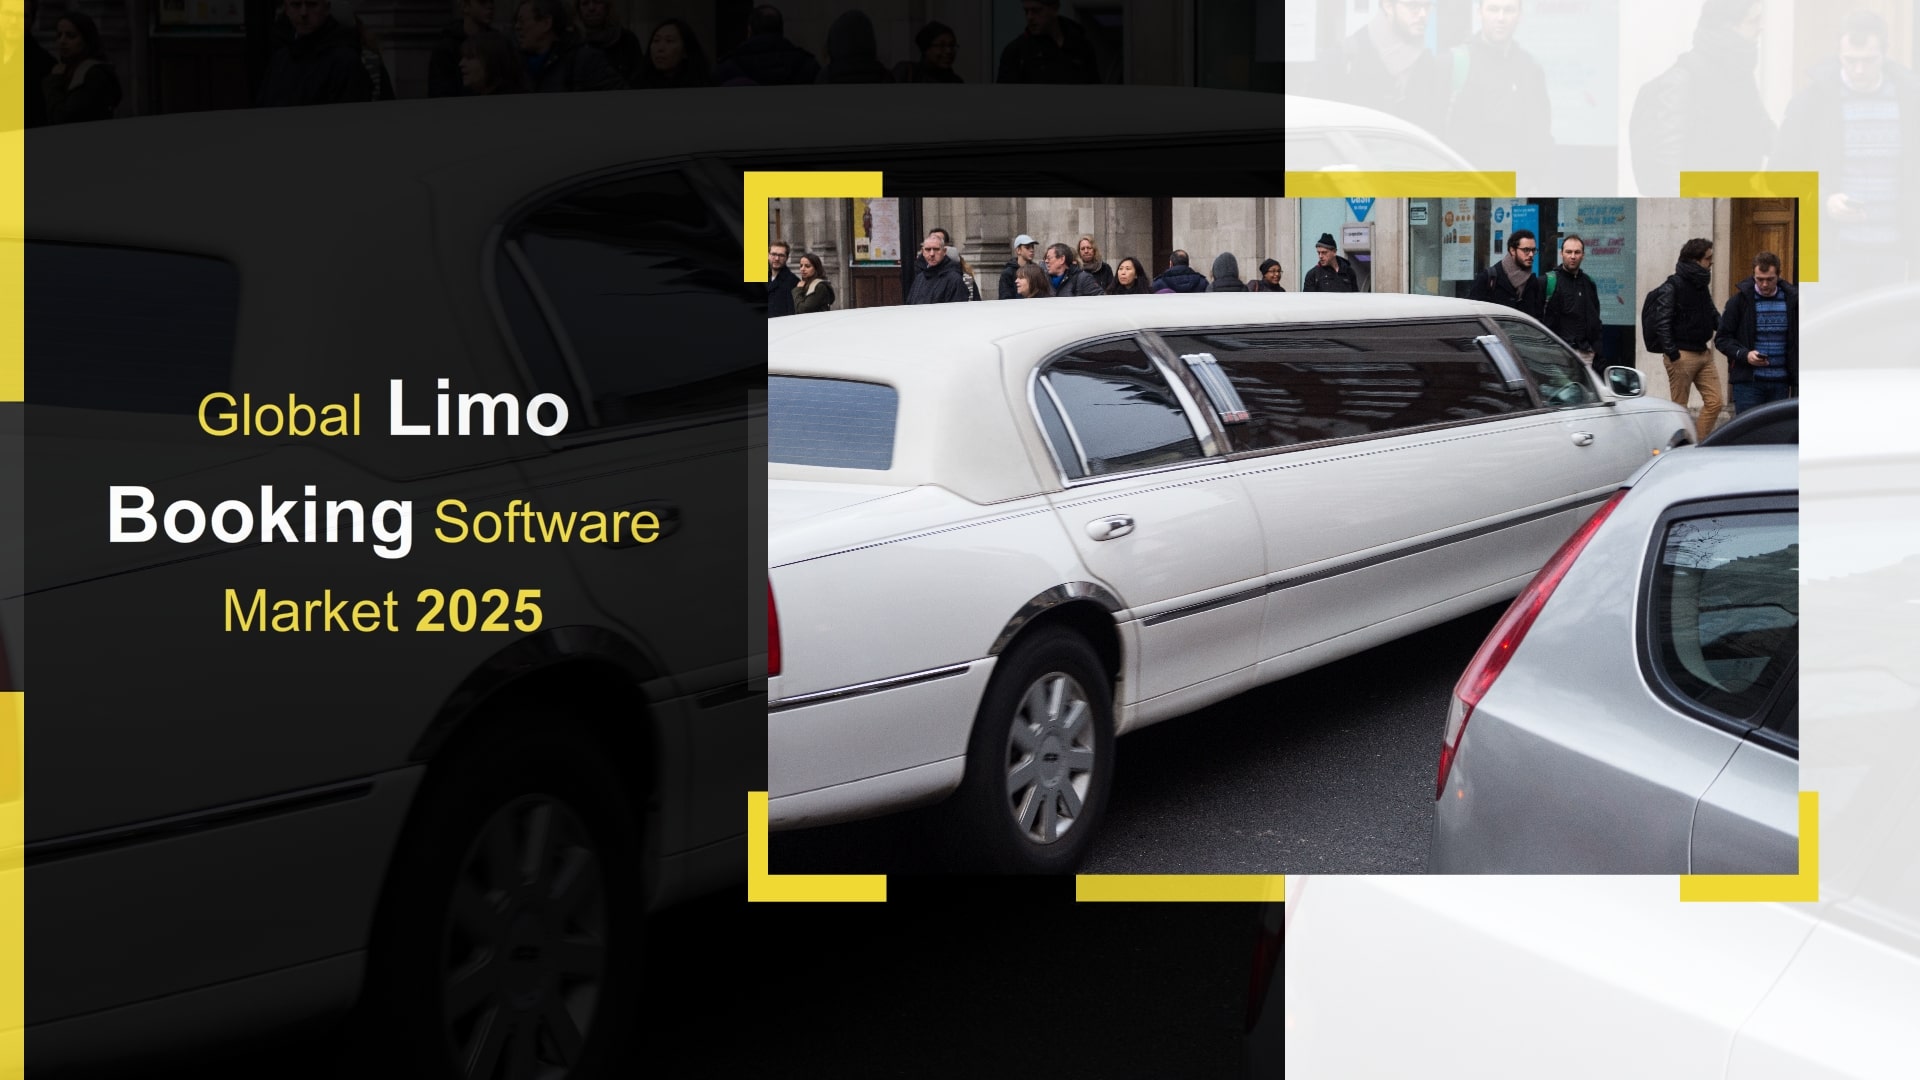 Global Limo Booking Software Market 2025